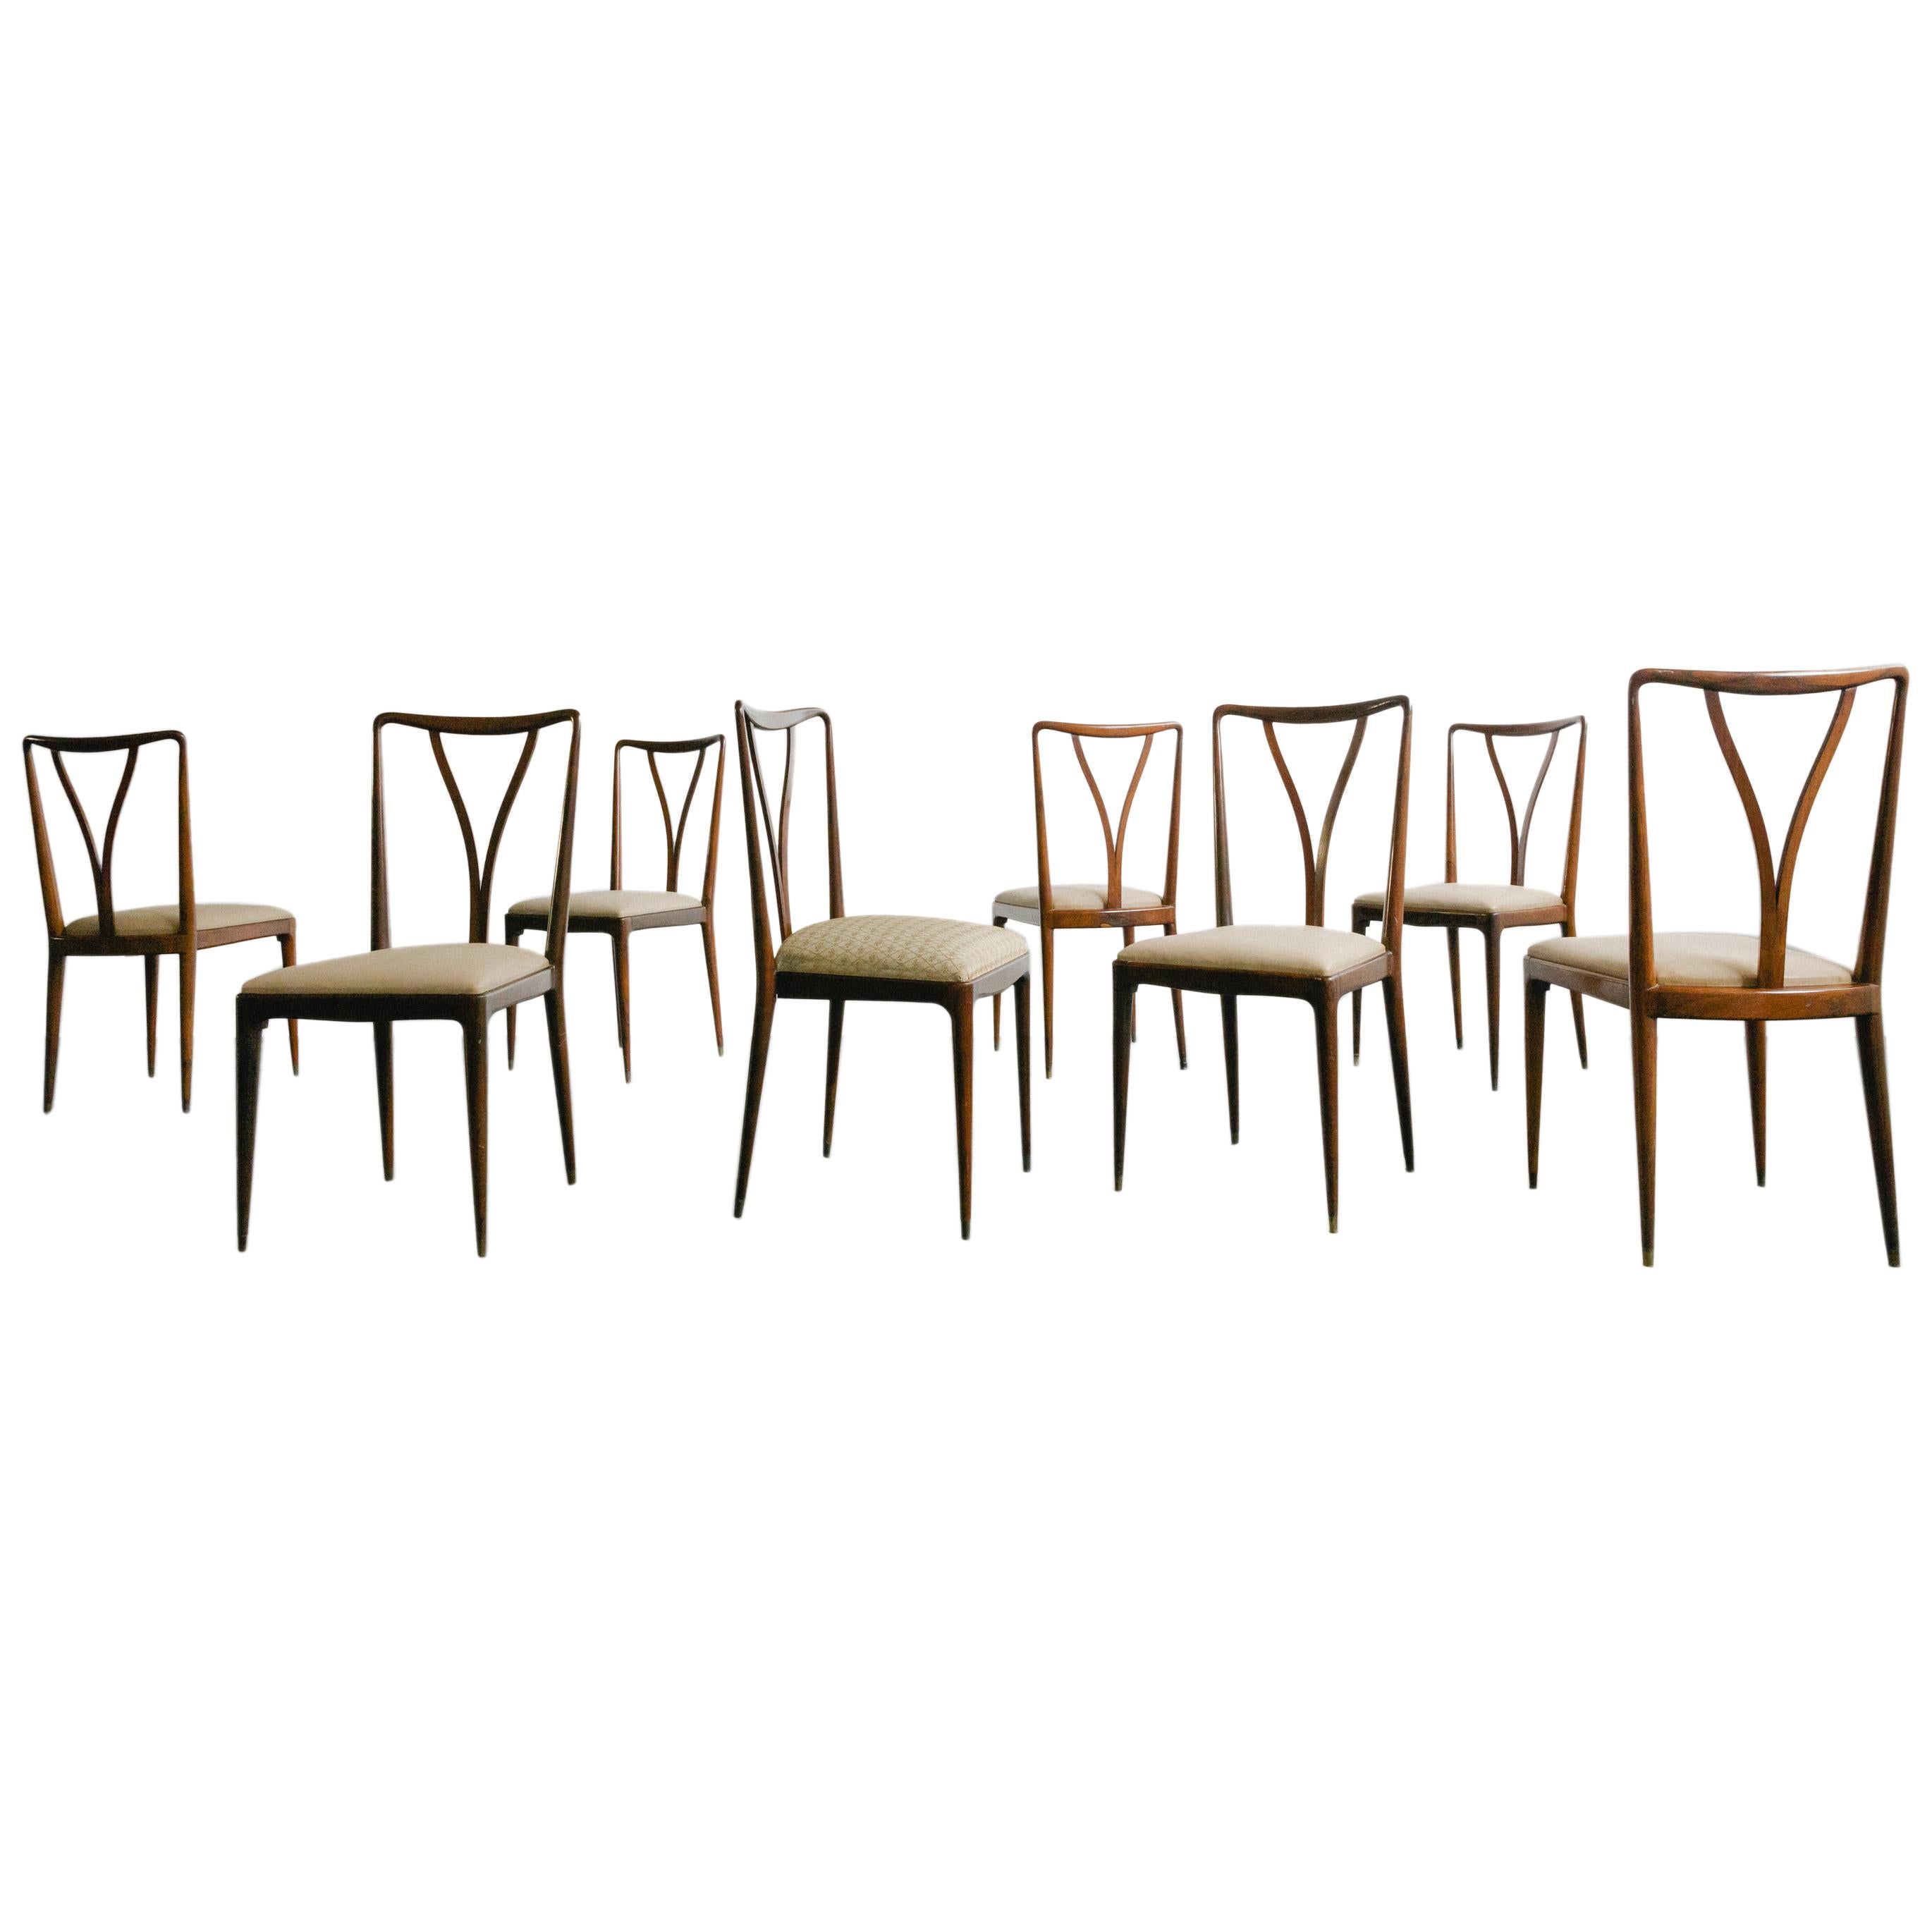 Rosewood Dining Chair, Giuseppe Scapinelli, Brazilian Midcentury, 1950s